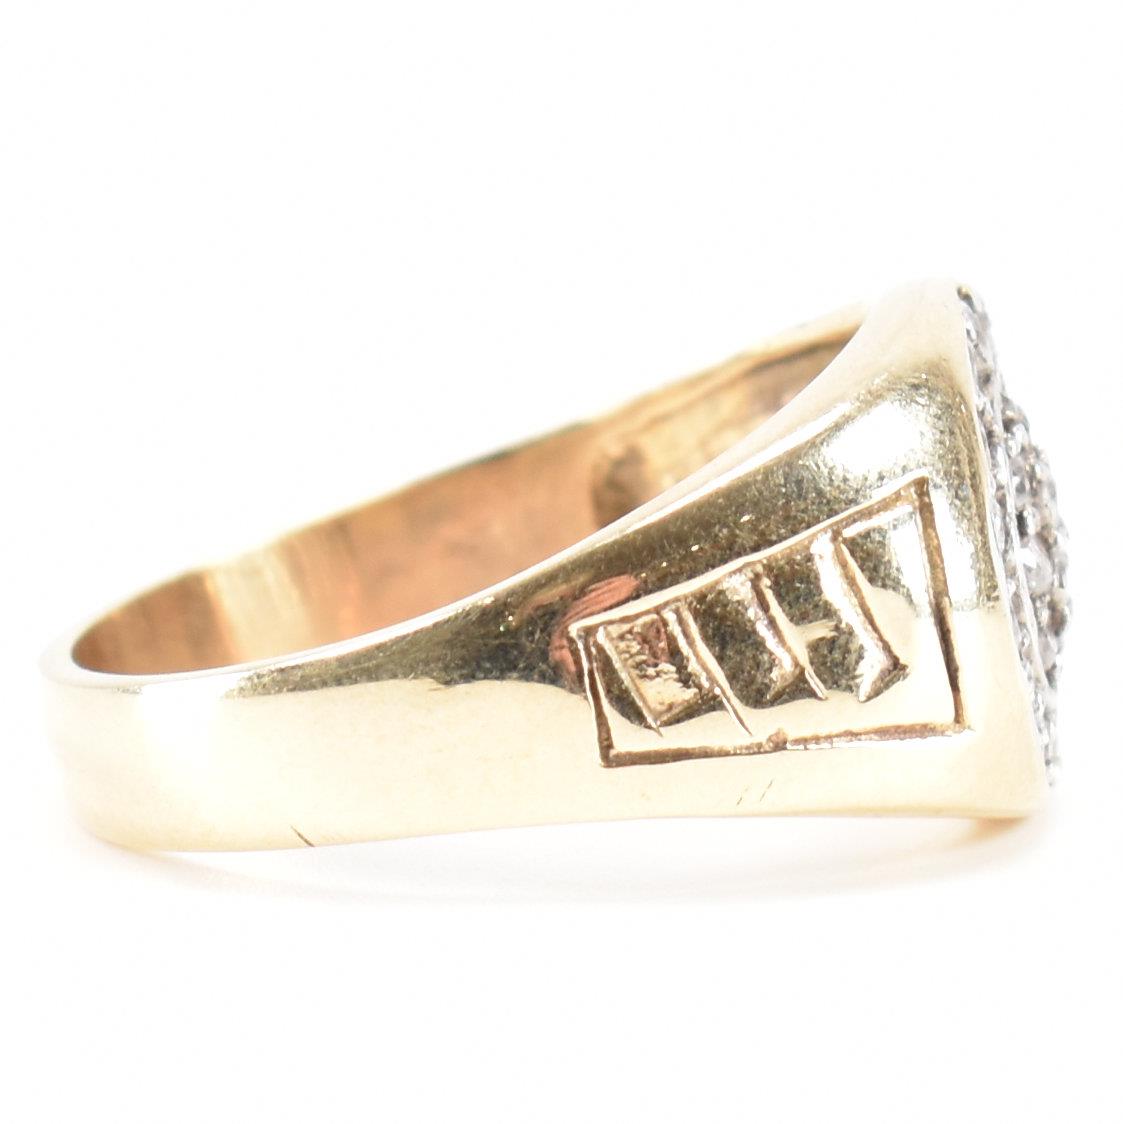 HALLMARKED 9CT GOLD & WHITE STONE CLUSTER RING - Image 5 of 8